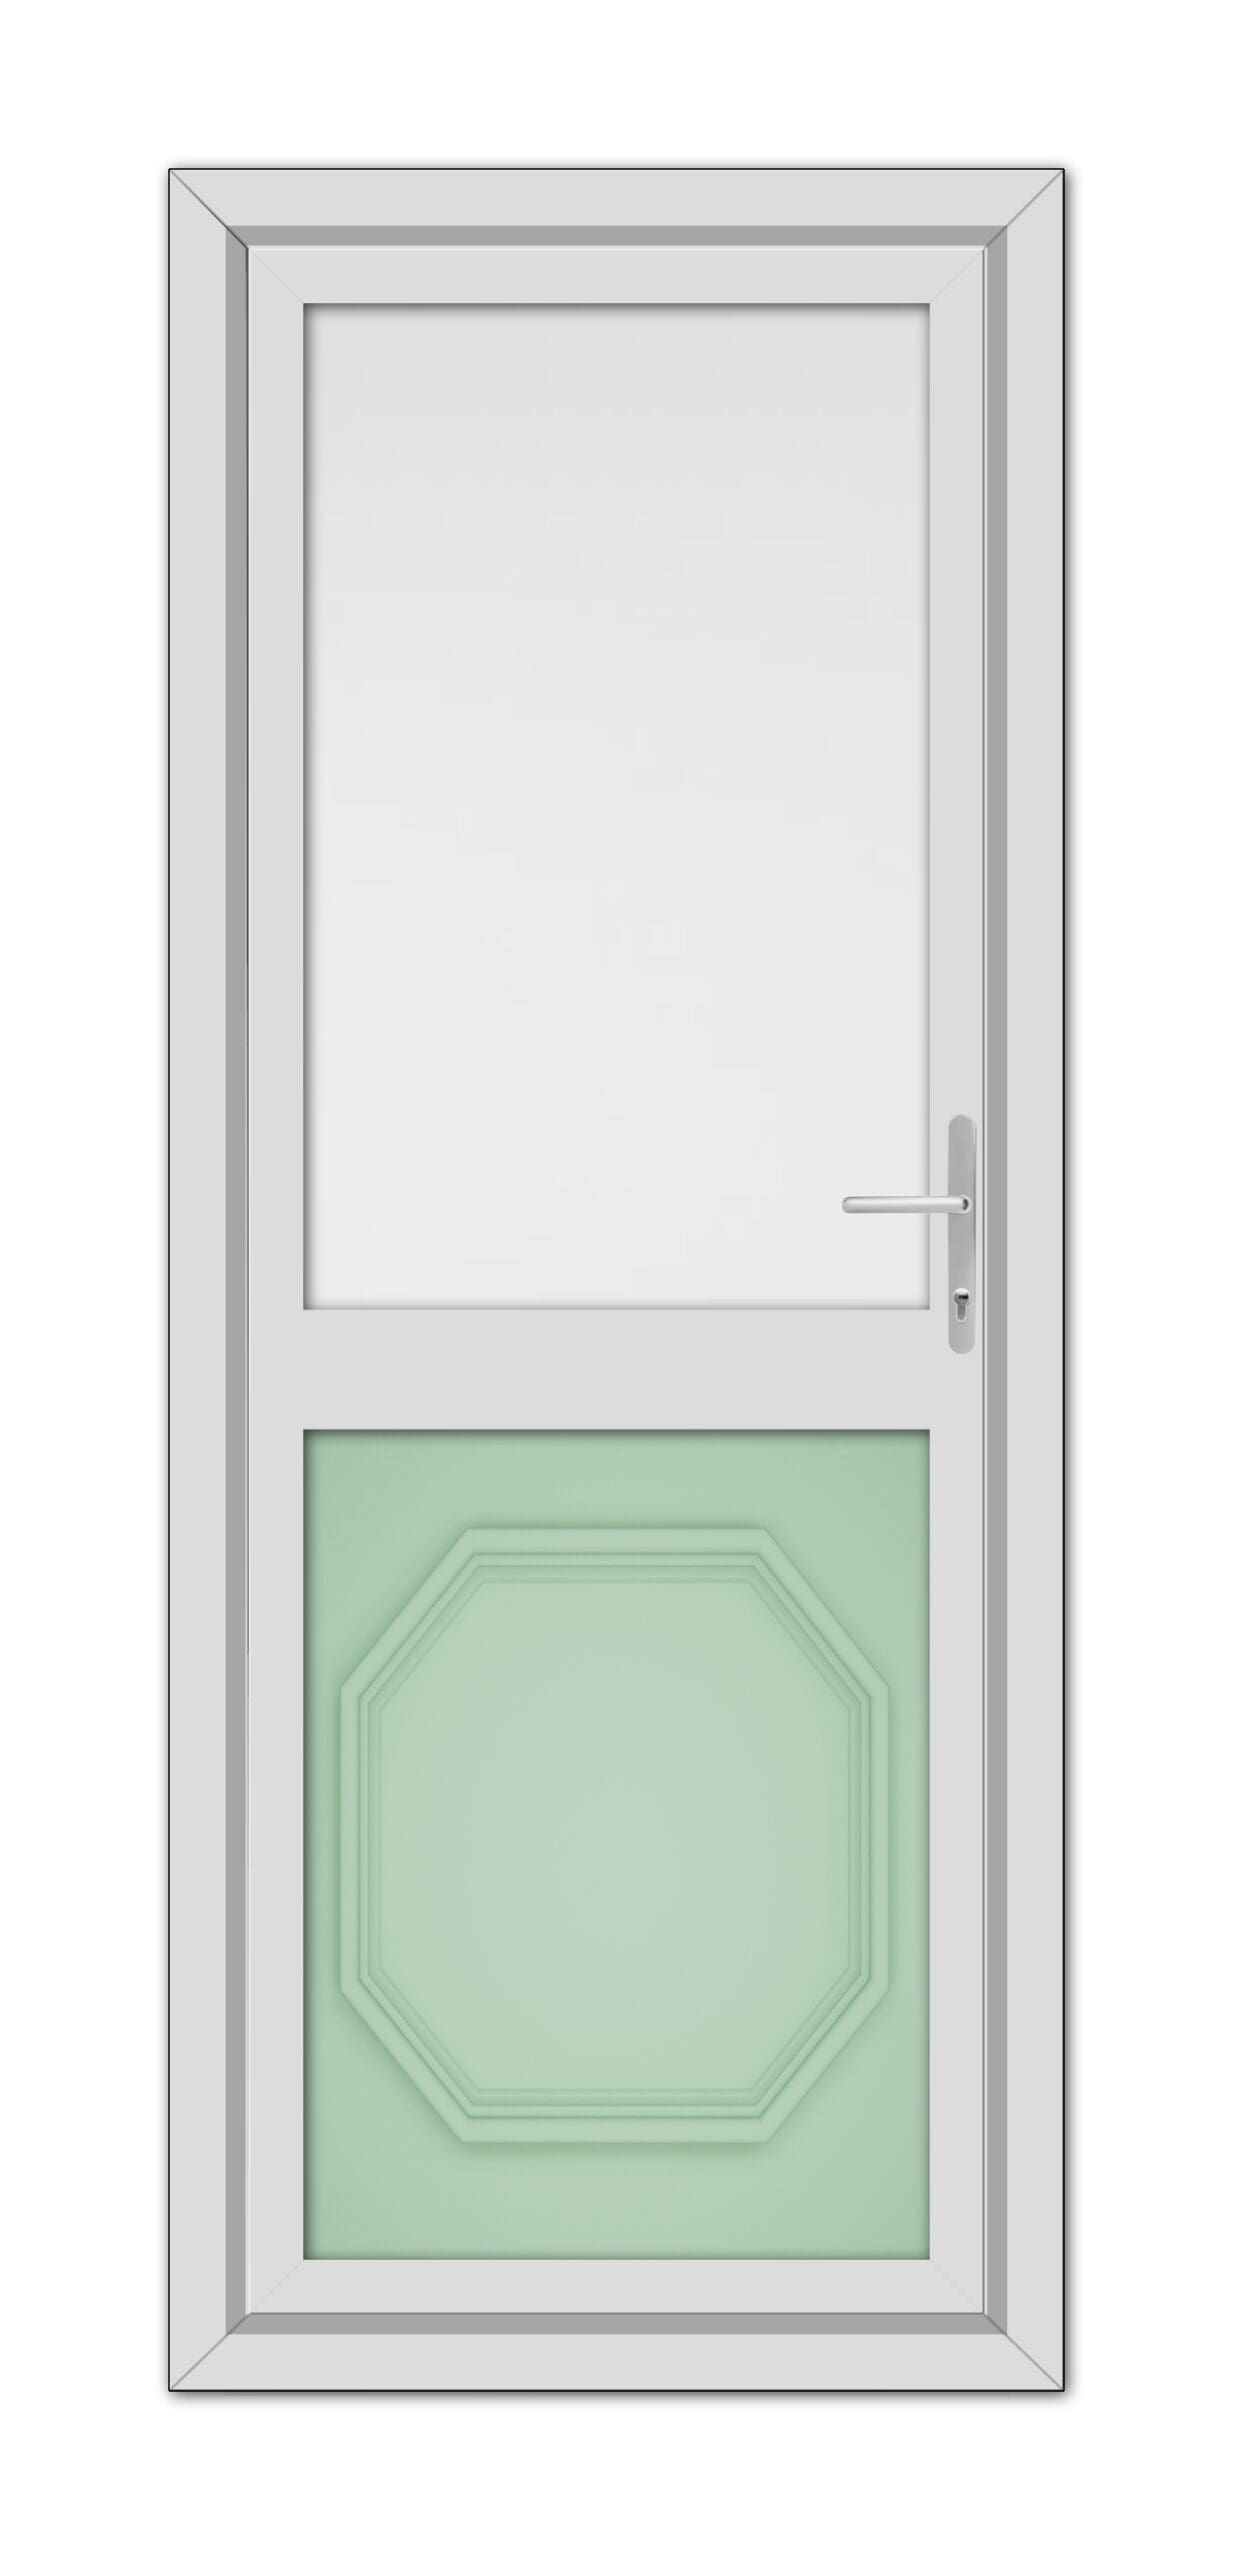 A closed modern door with a geometric lower panel in Chartwell Green and a translucent window on the top, all framed in a white casing.